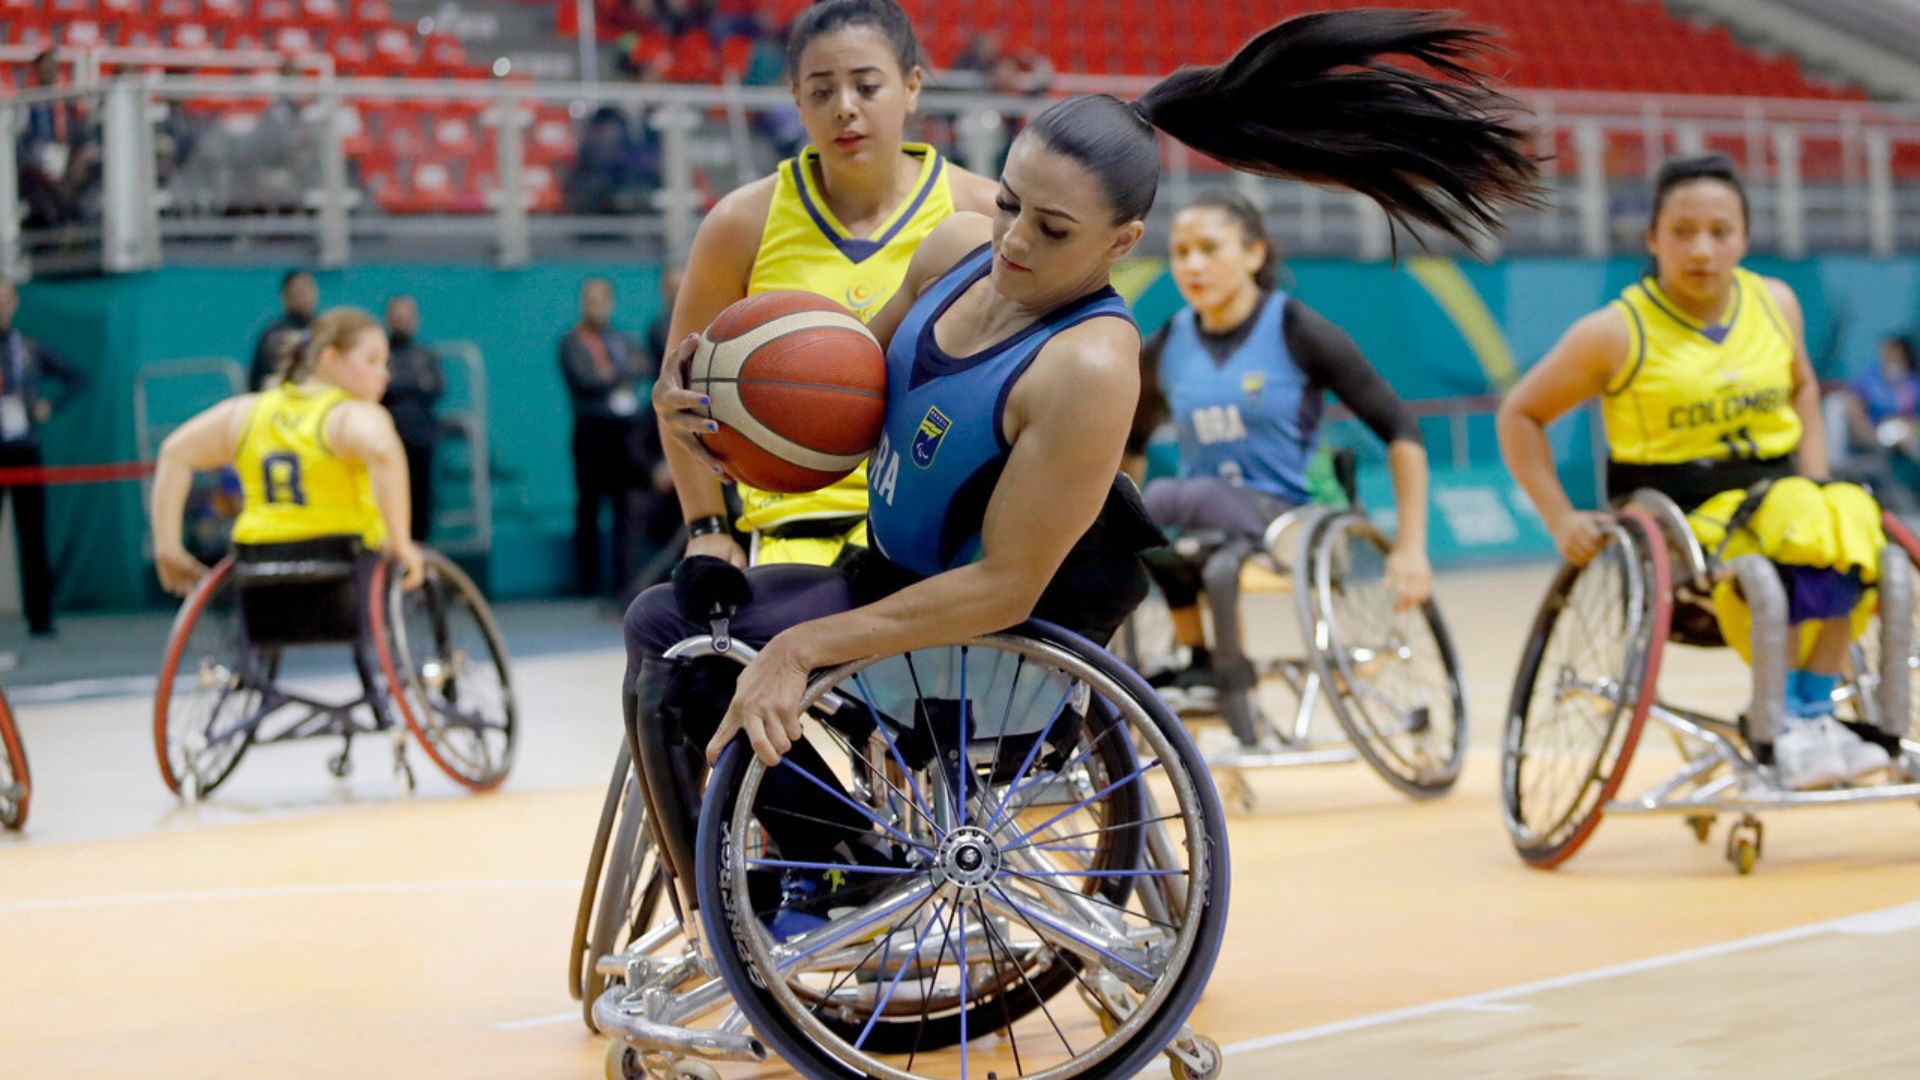 Wheelchair Basketball: Brazilian Team Secures Their First Victory